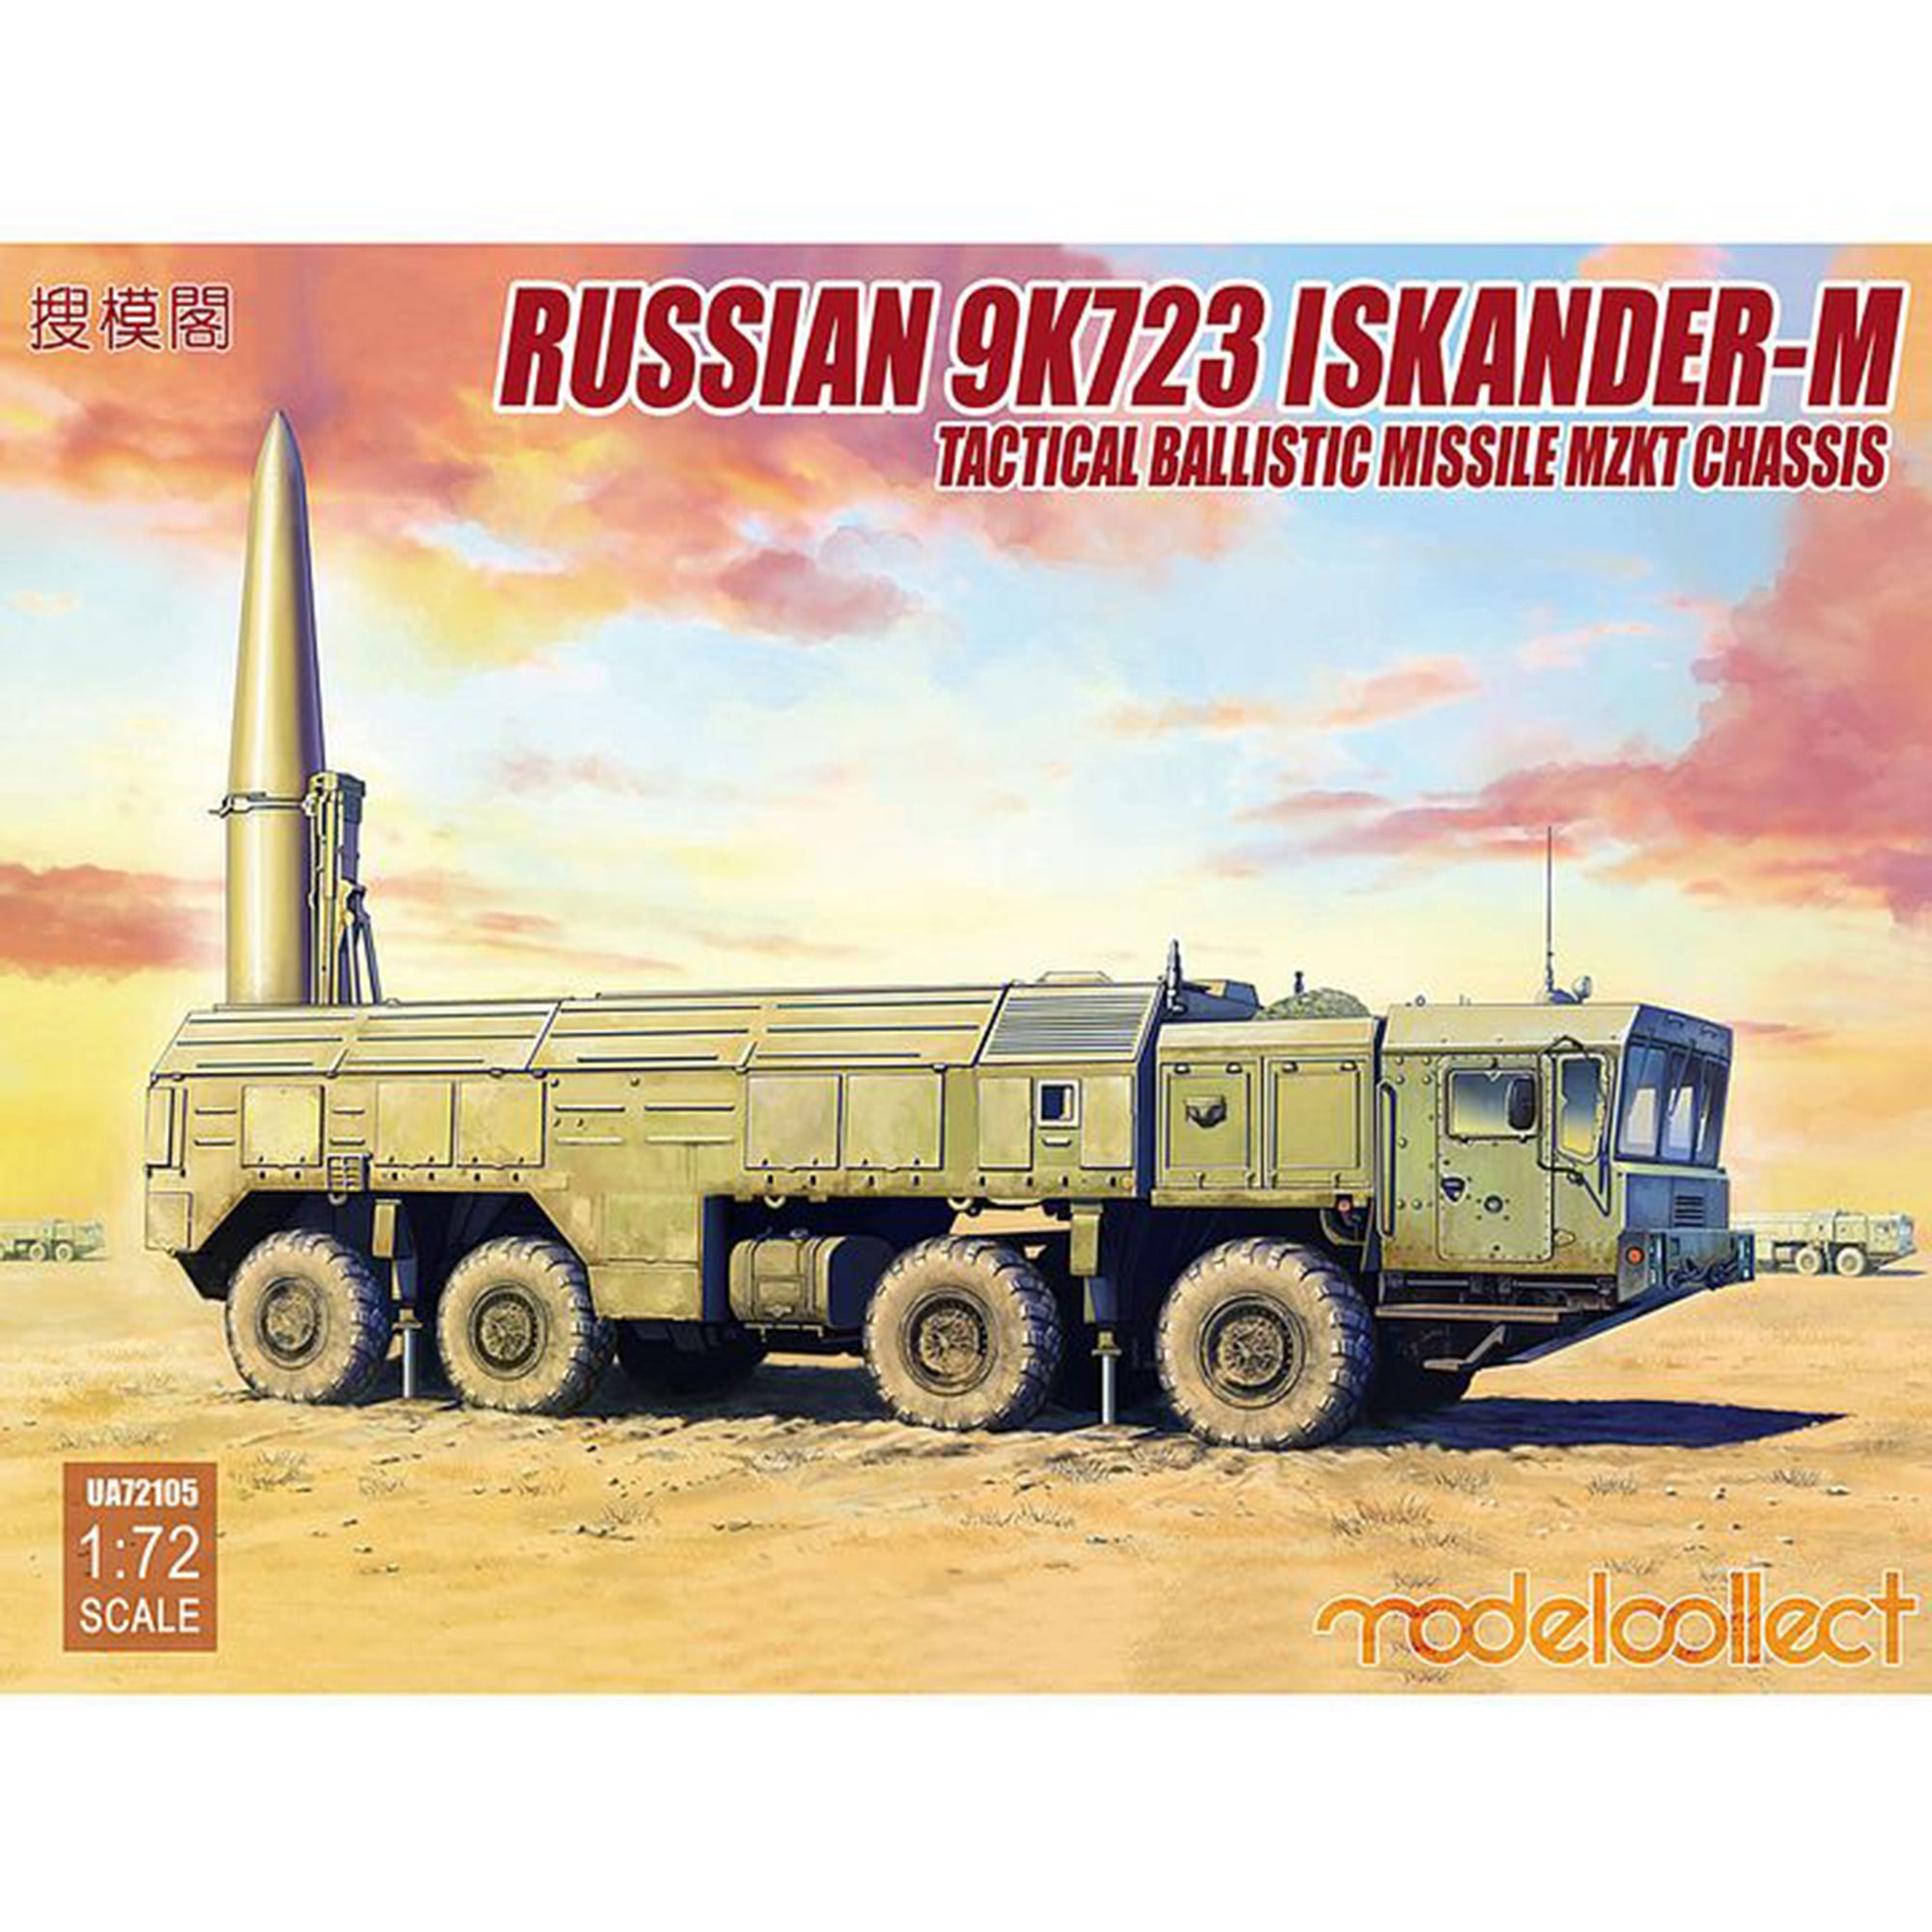 Modelcollect UA72105 1/72 Russian 9K723 Iskander-M Tactical Ballistic Missile MZKT Chassis Model Kit